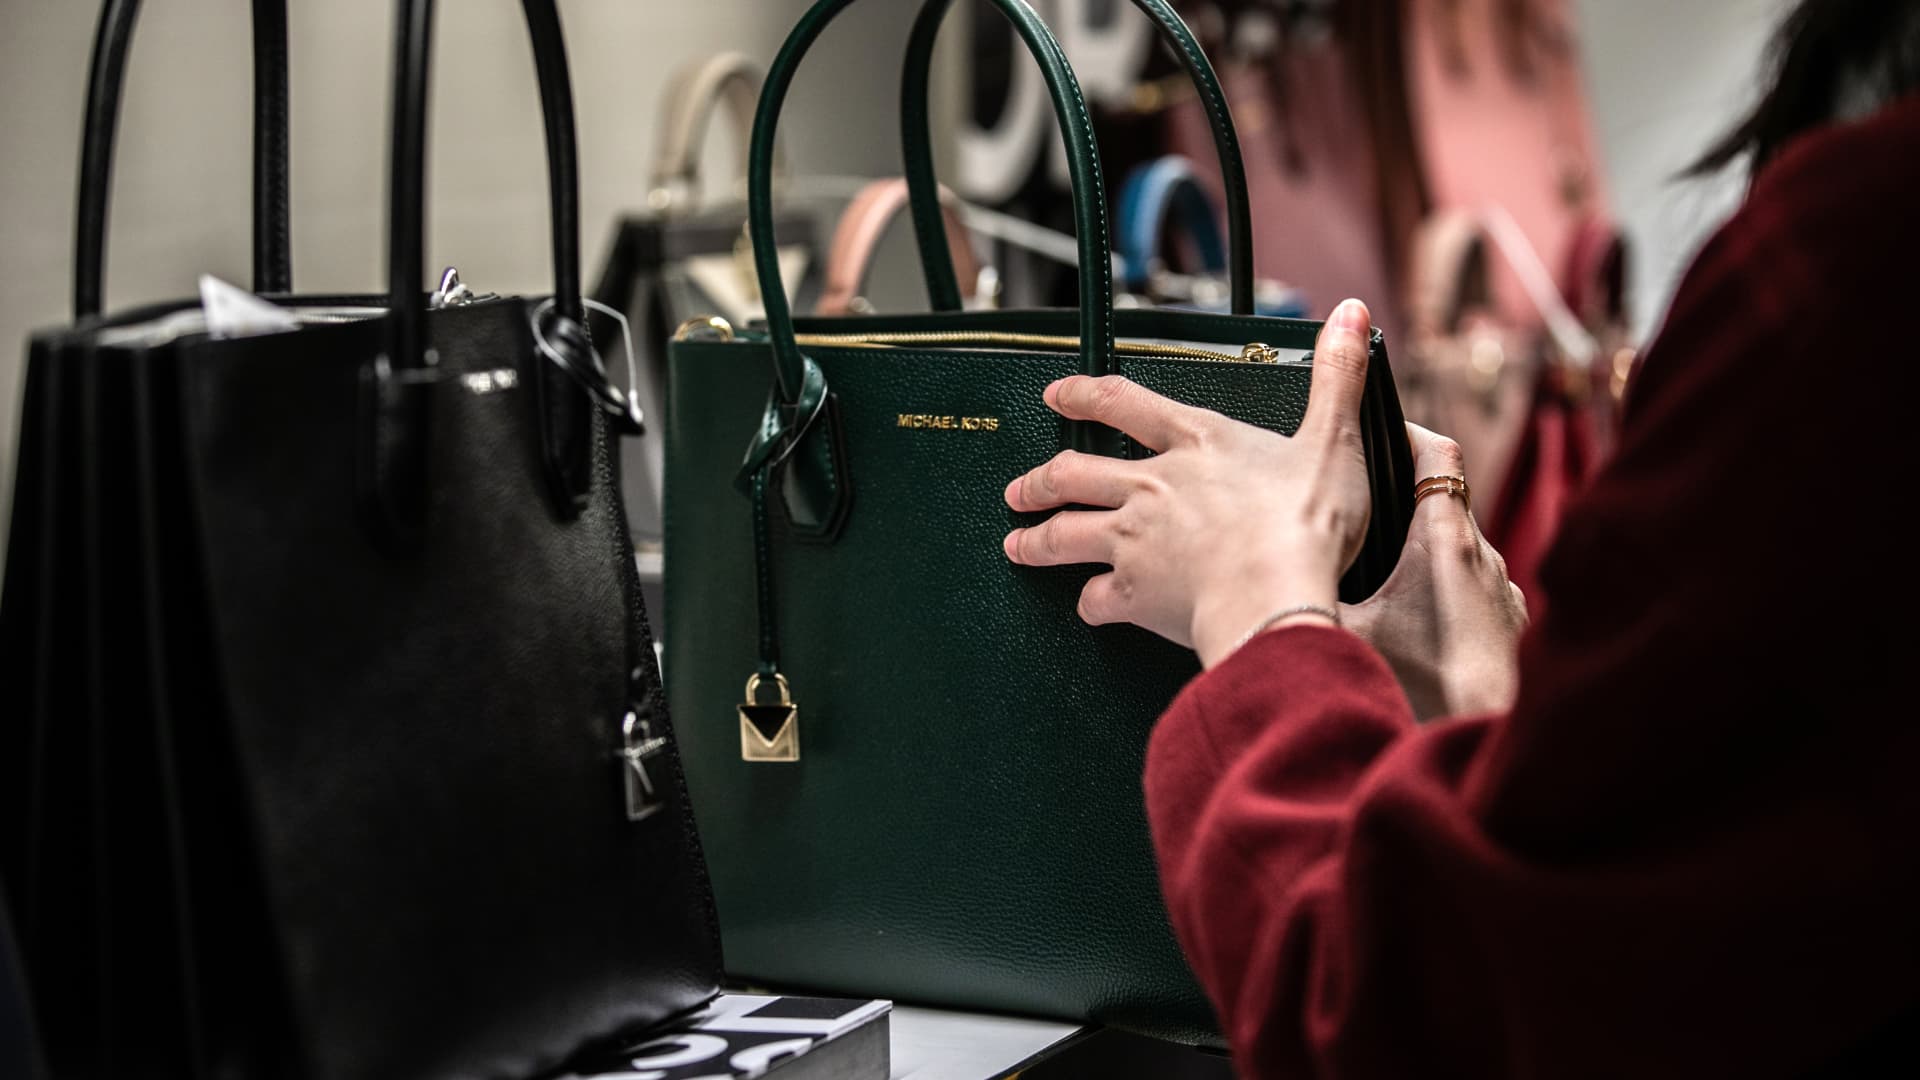 Michael Kors, Coach take notice: There's a major consumer shift underway